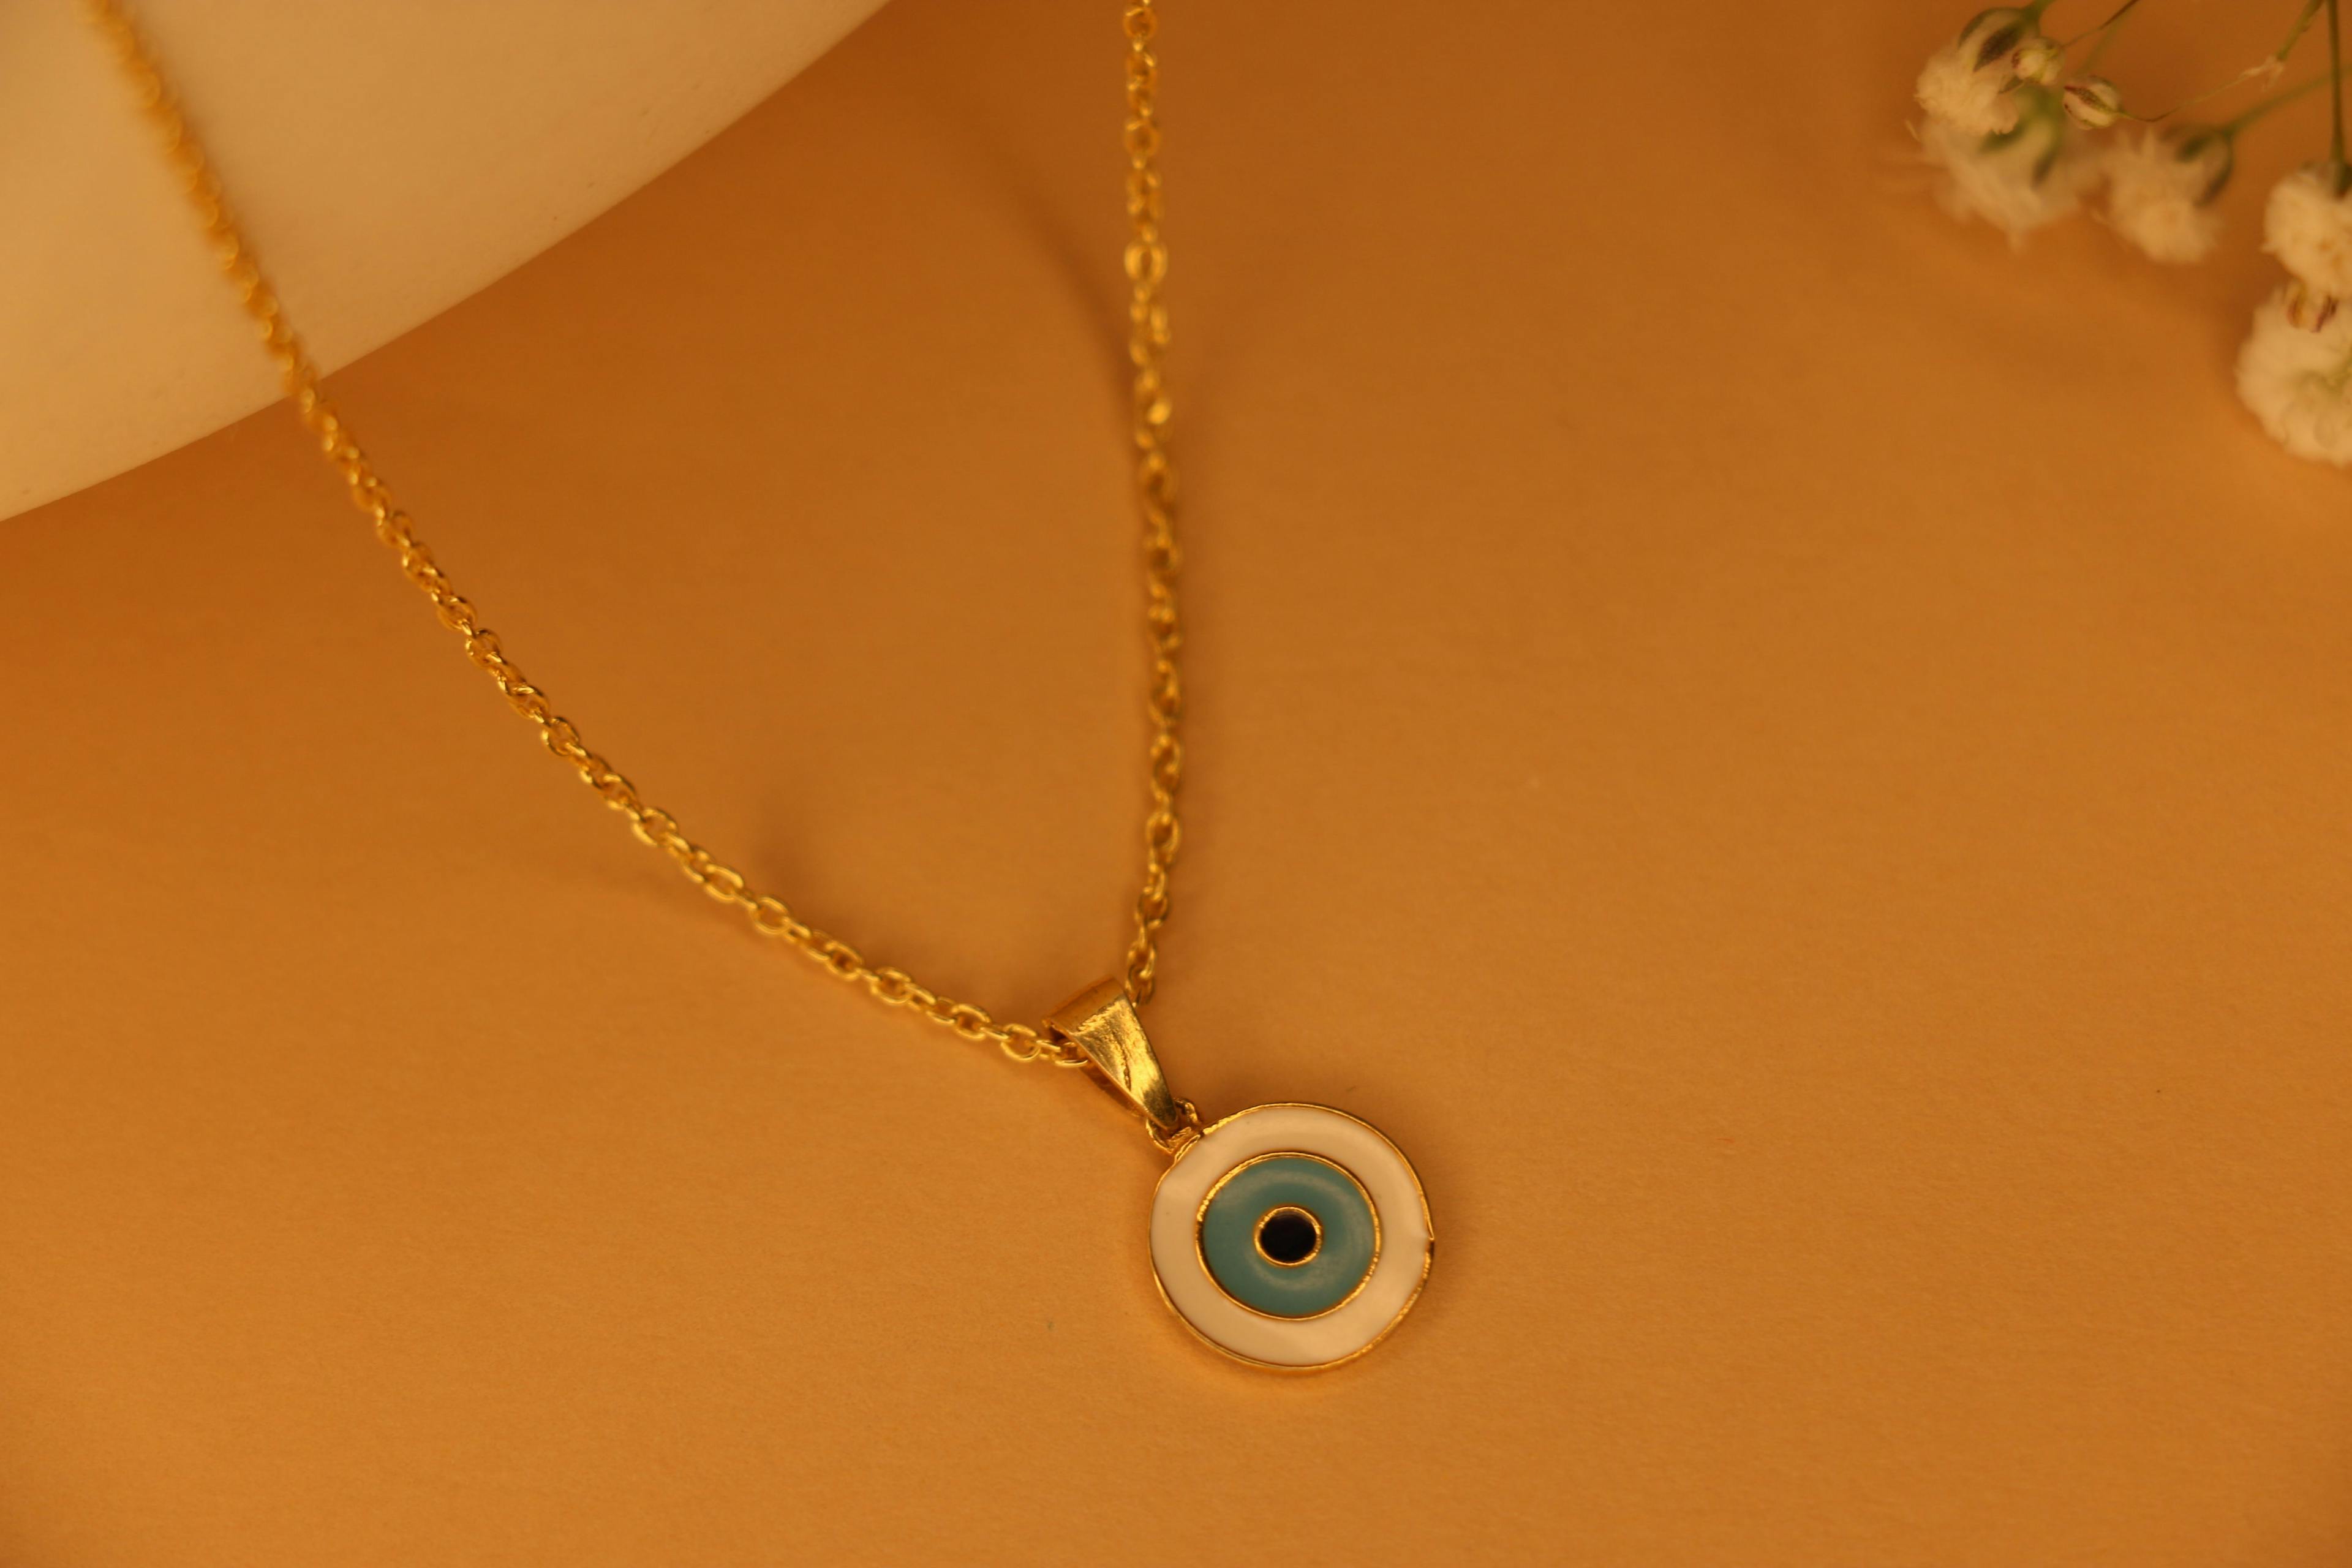 Evil eye charm necklace, a product by The Jewel Closet Store